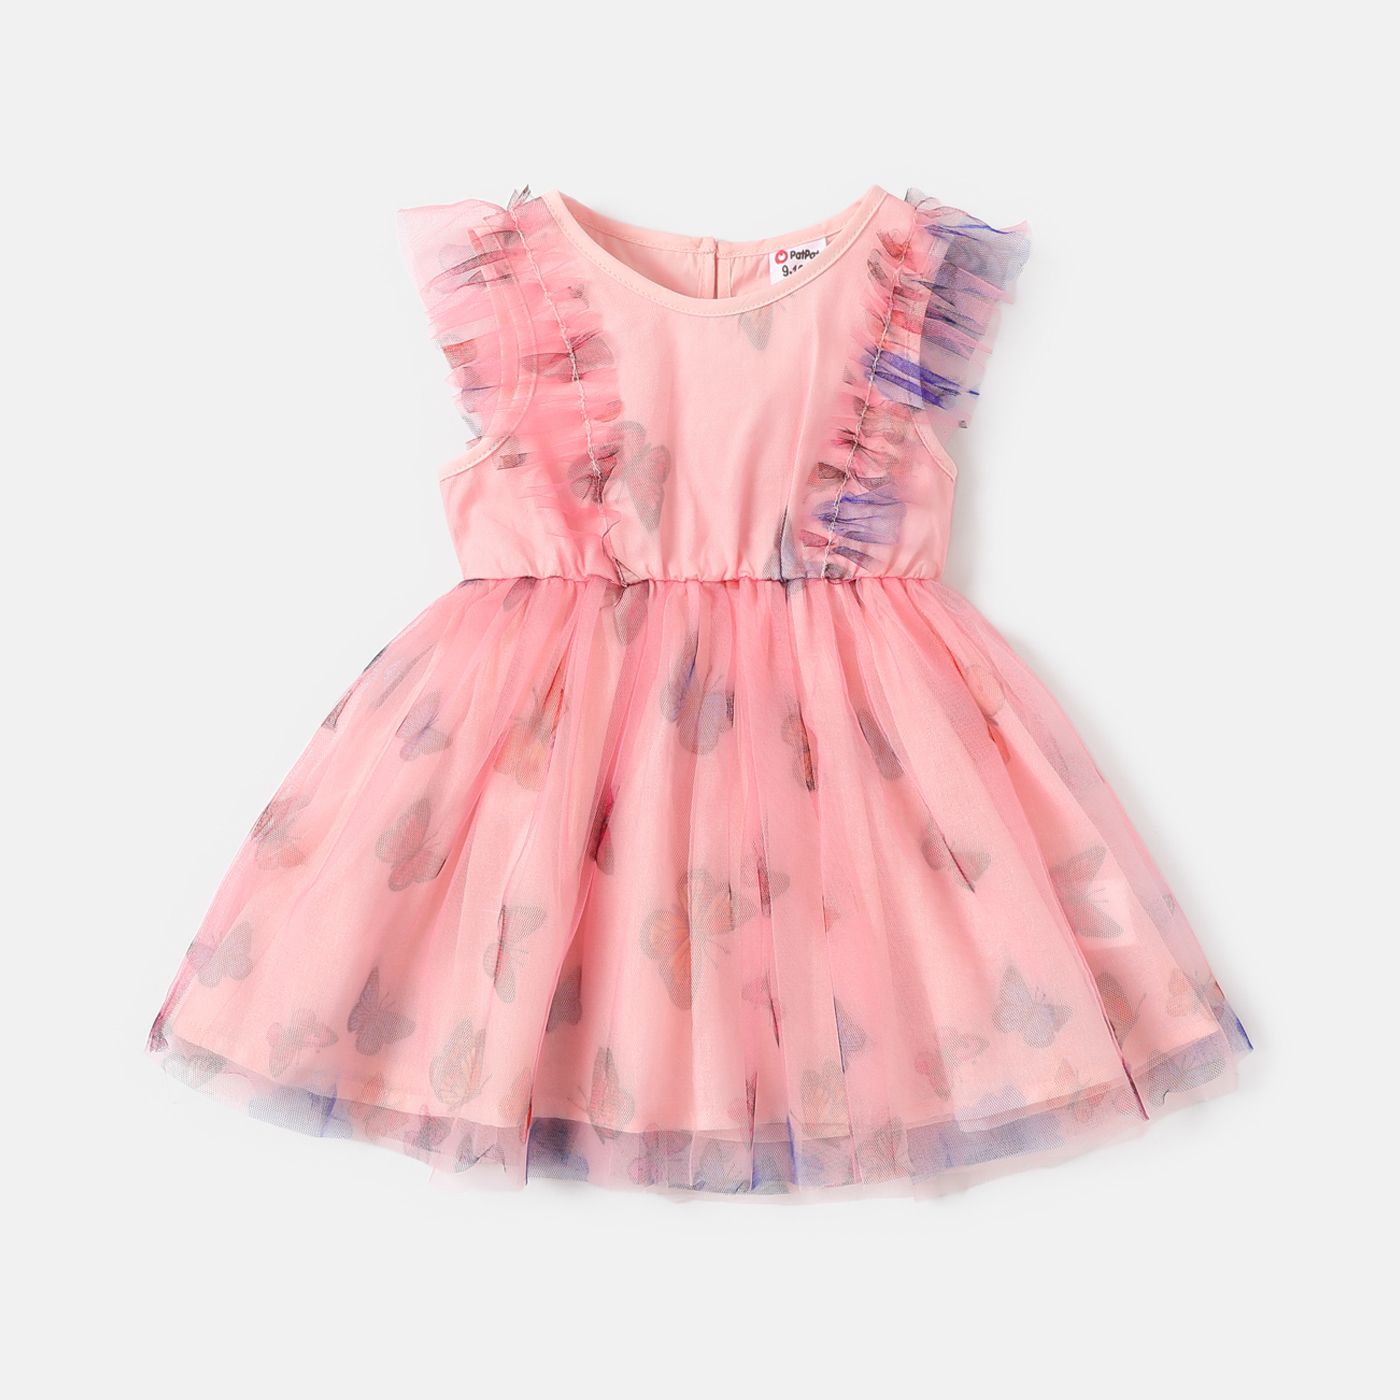 Baby Girl Butterfly Pattern Lace Trim Mesh Overlay Dress